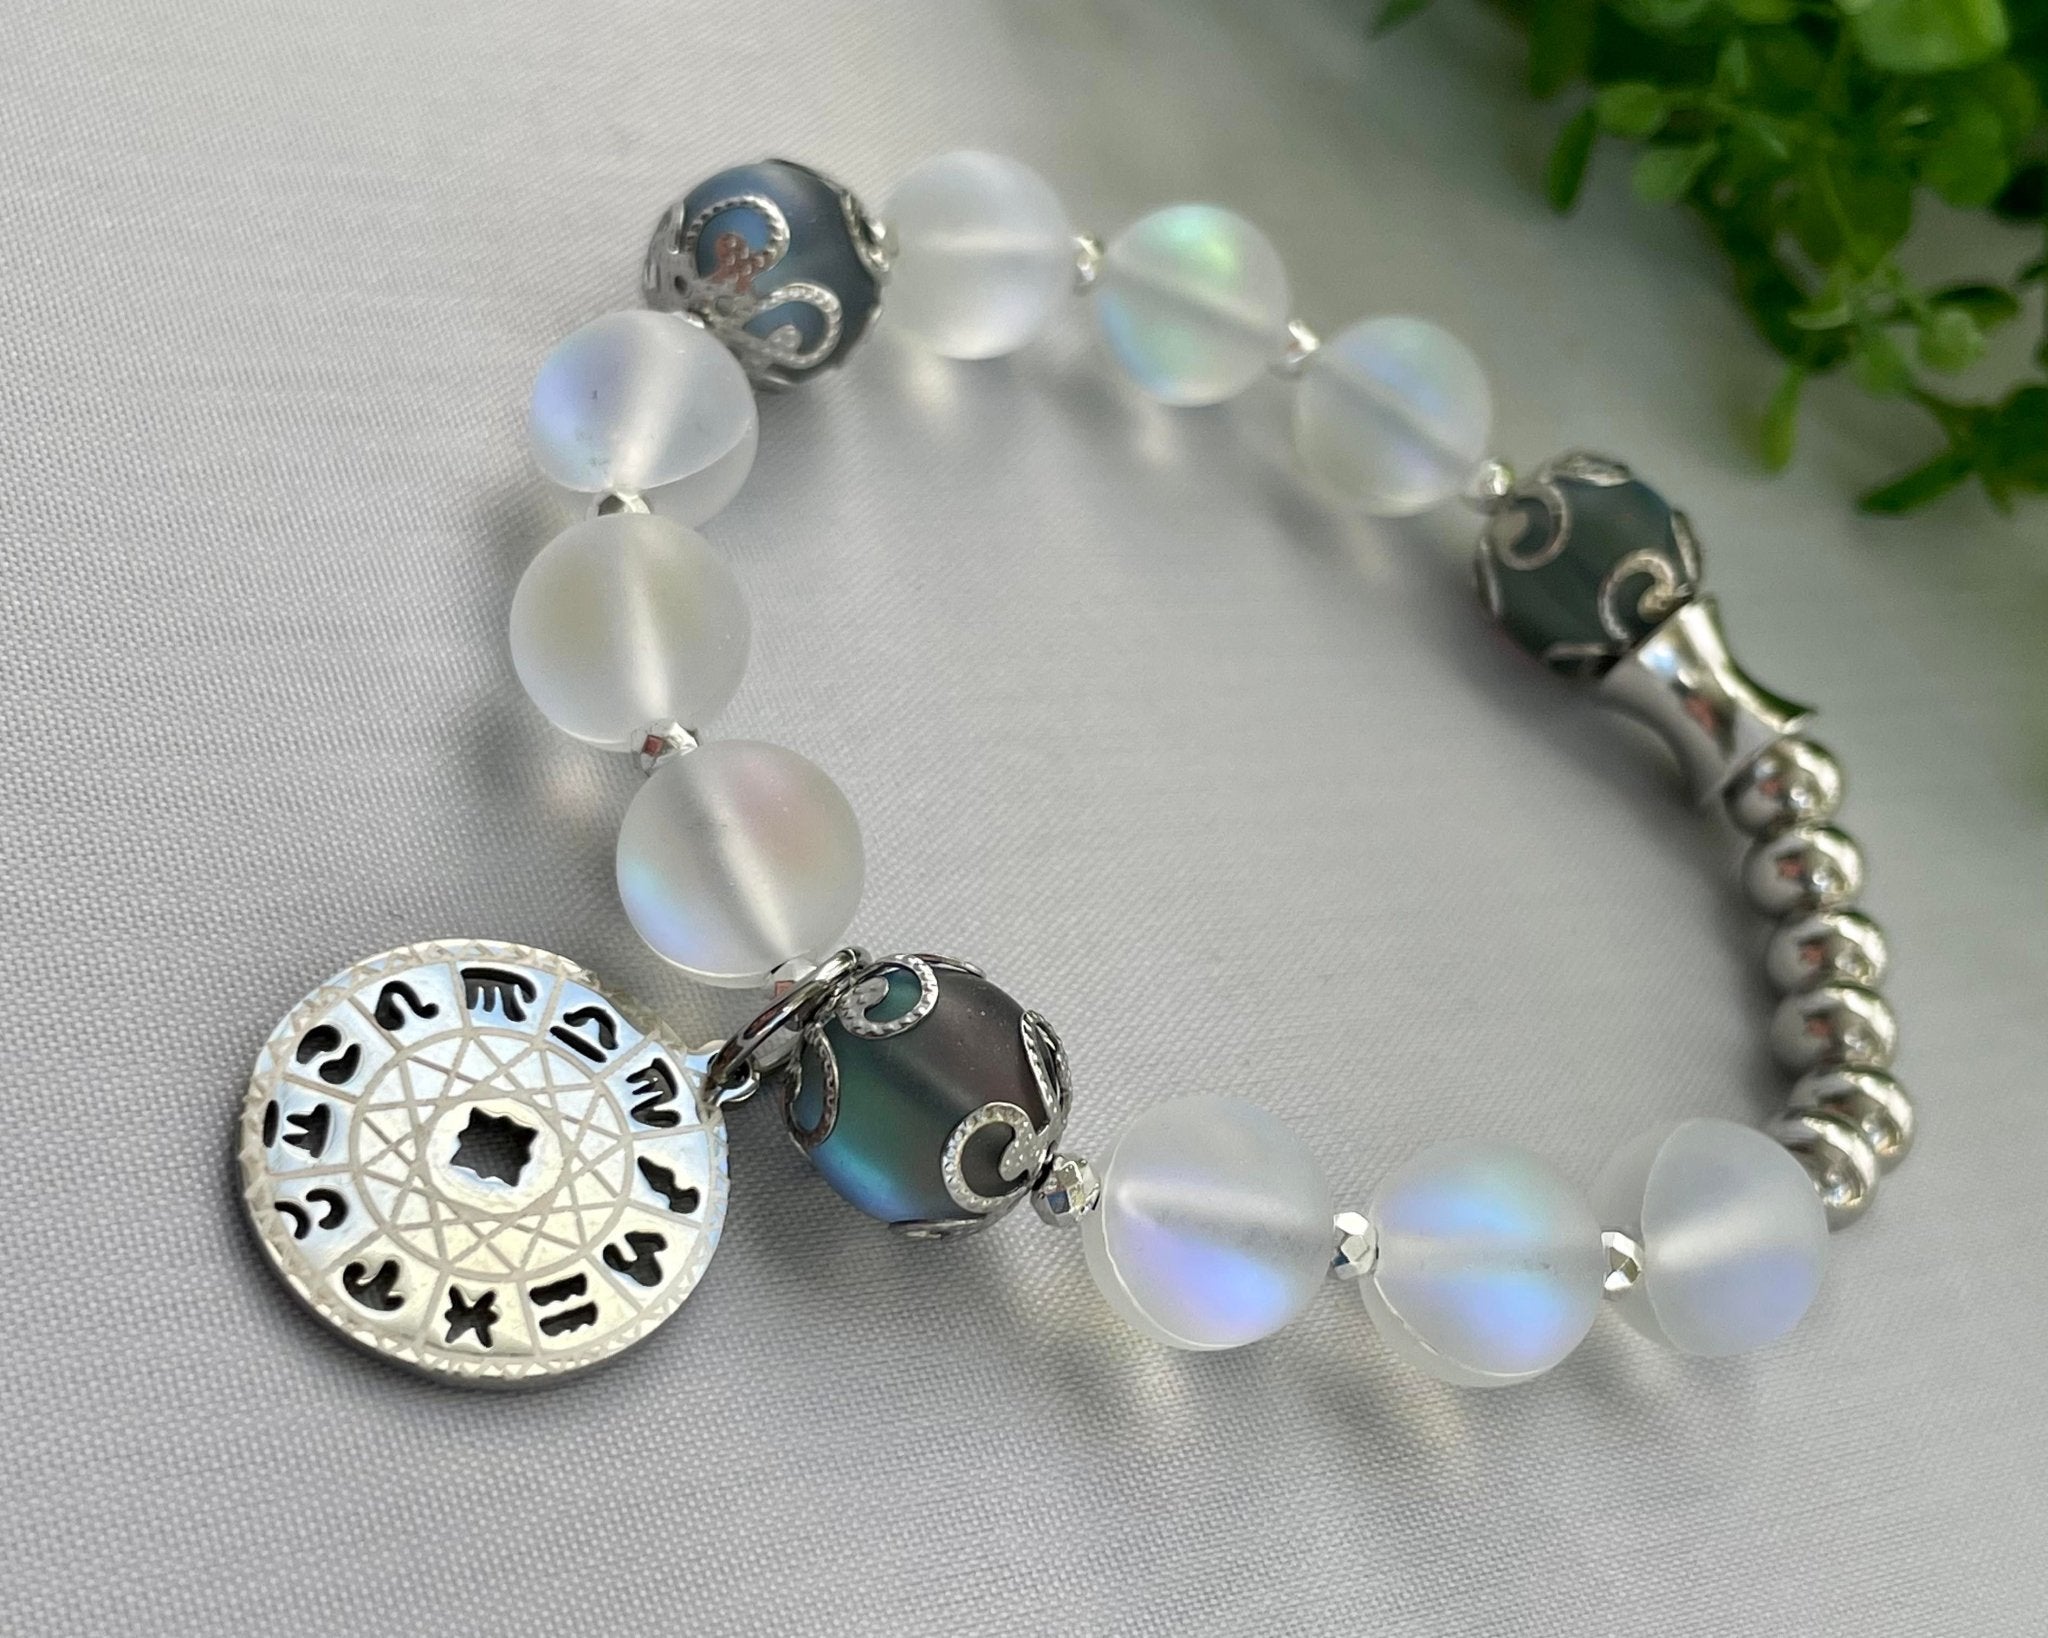 Angel Aura Quartz & Moonstone Stretchy Beaded Bracelet with Constellation Stainless Charm - CYR'S CREATIONS